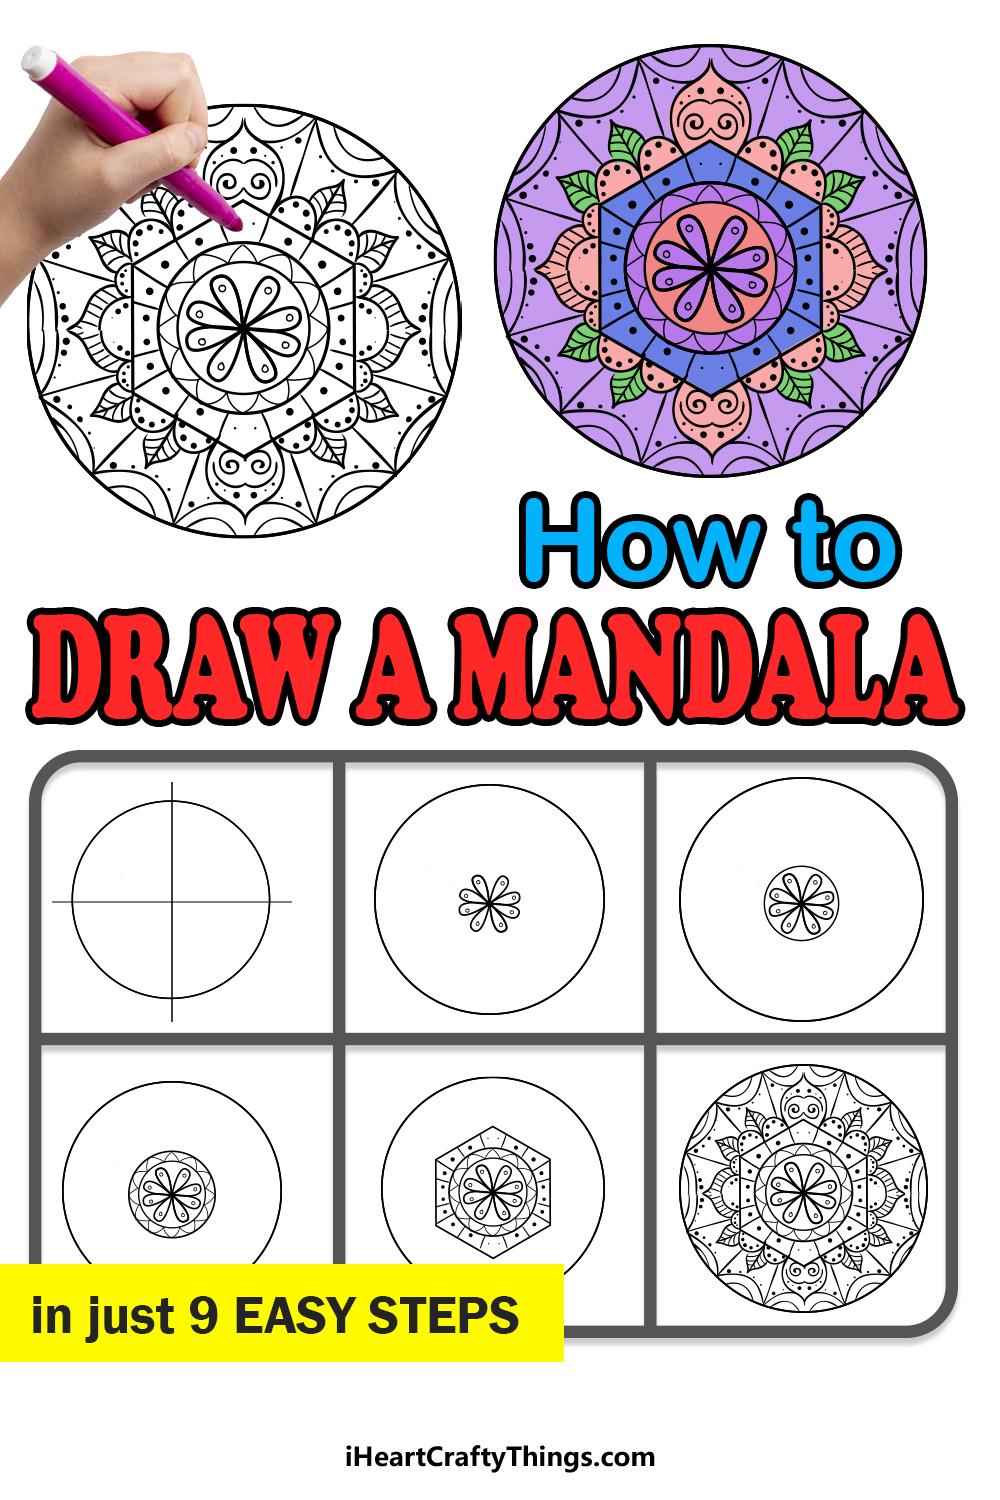 how to draw a mandala in 9 easy steps